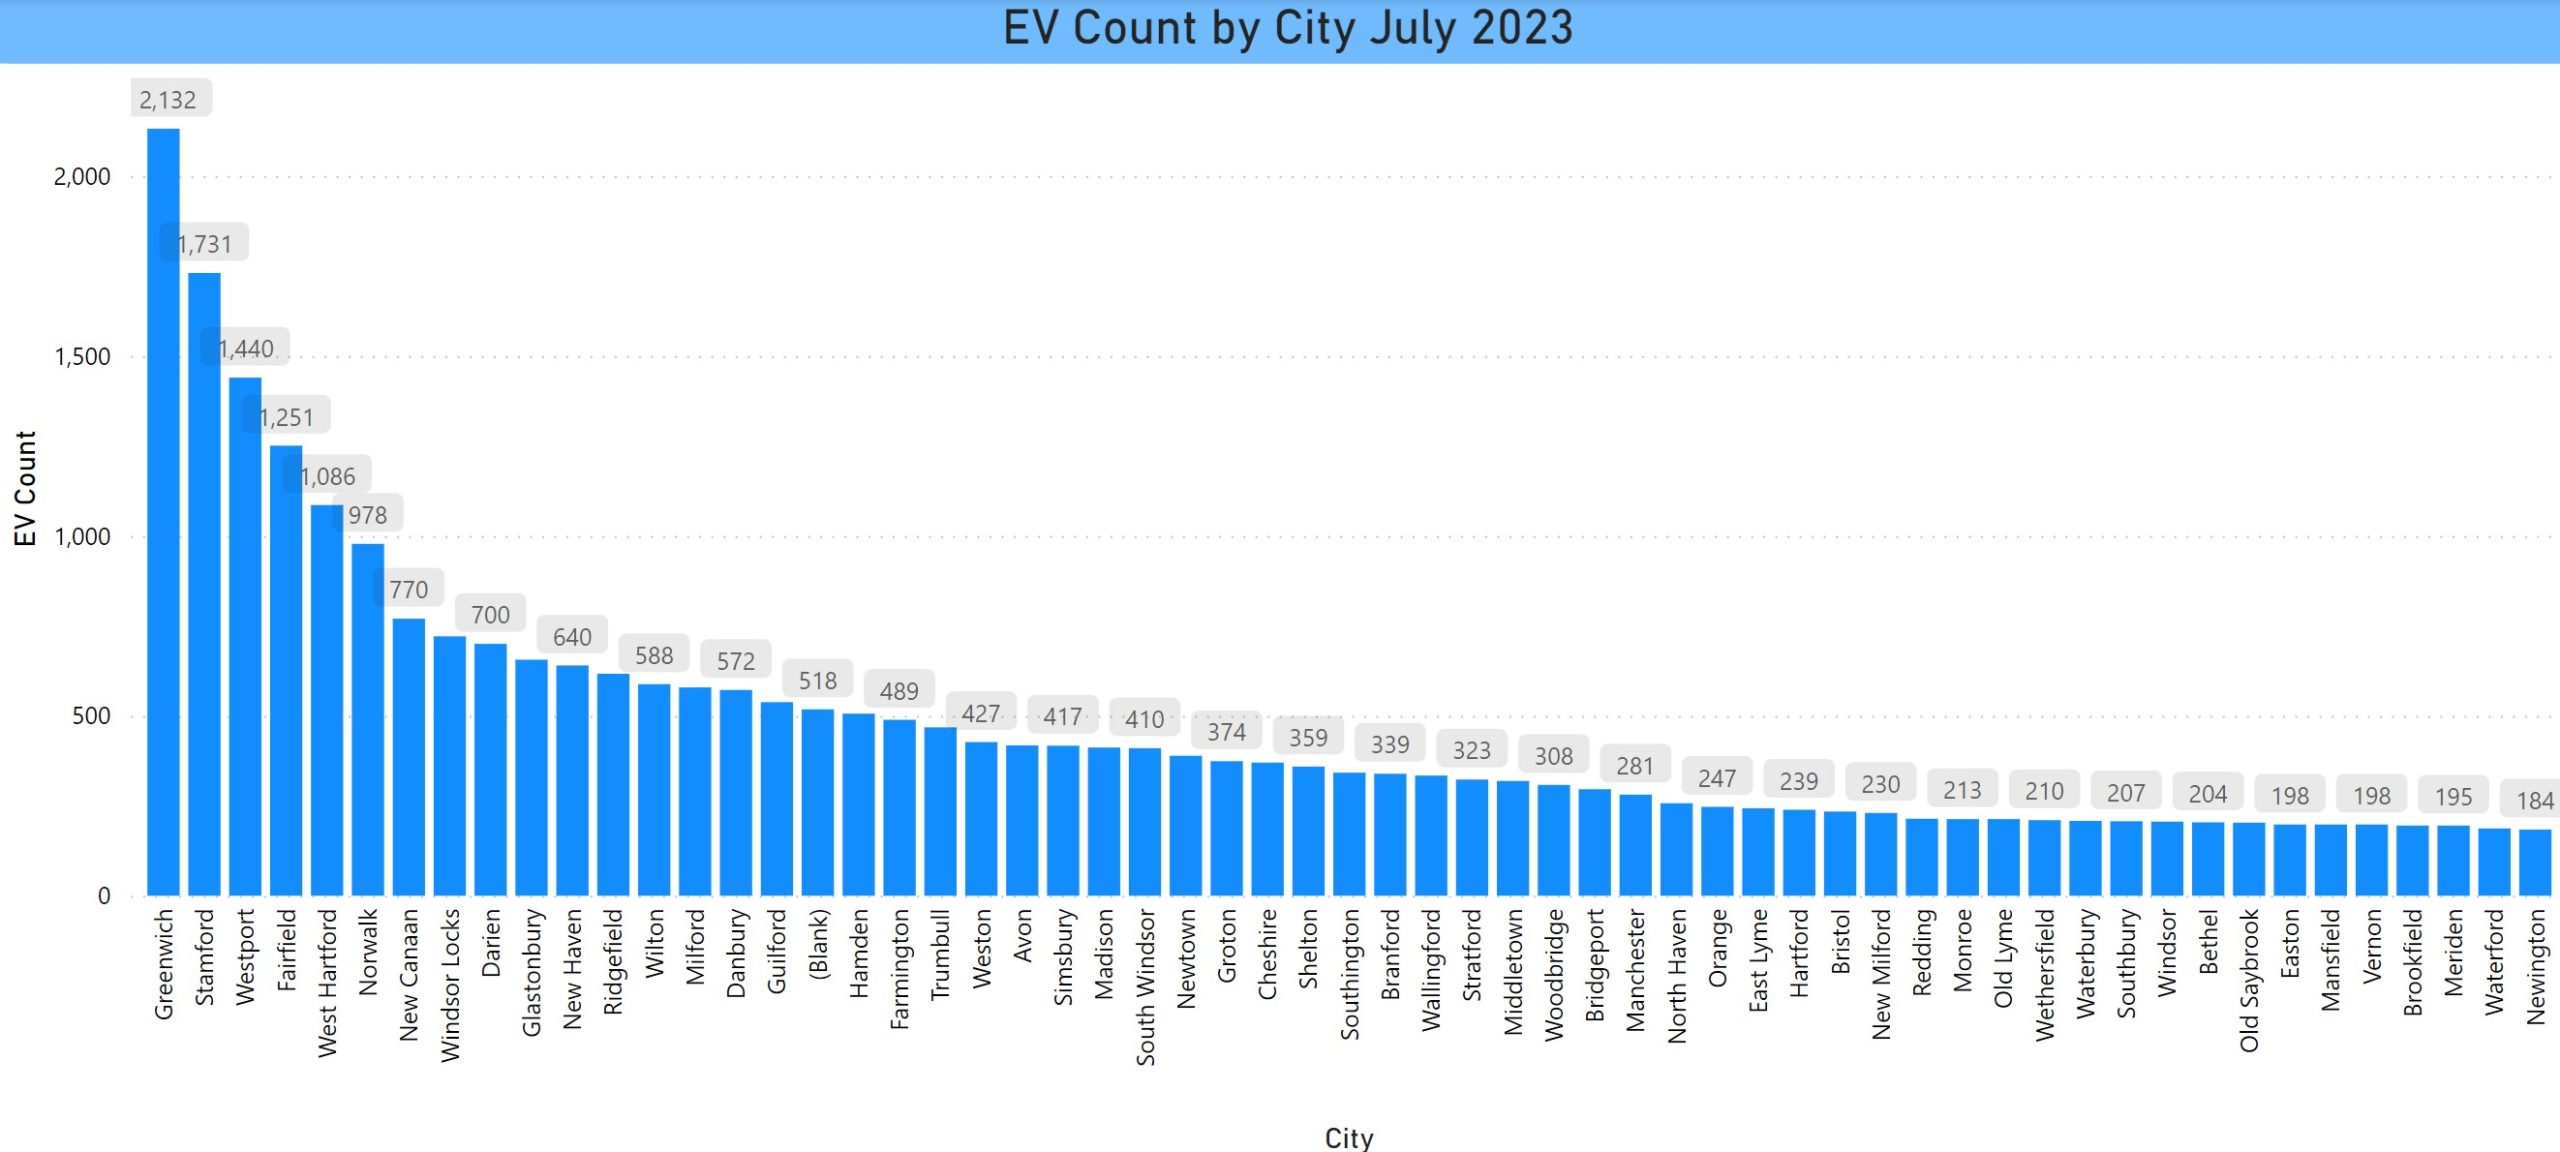 EV Count by City